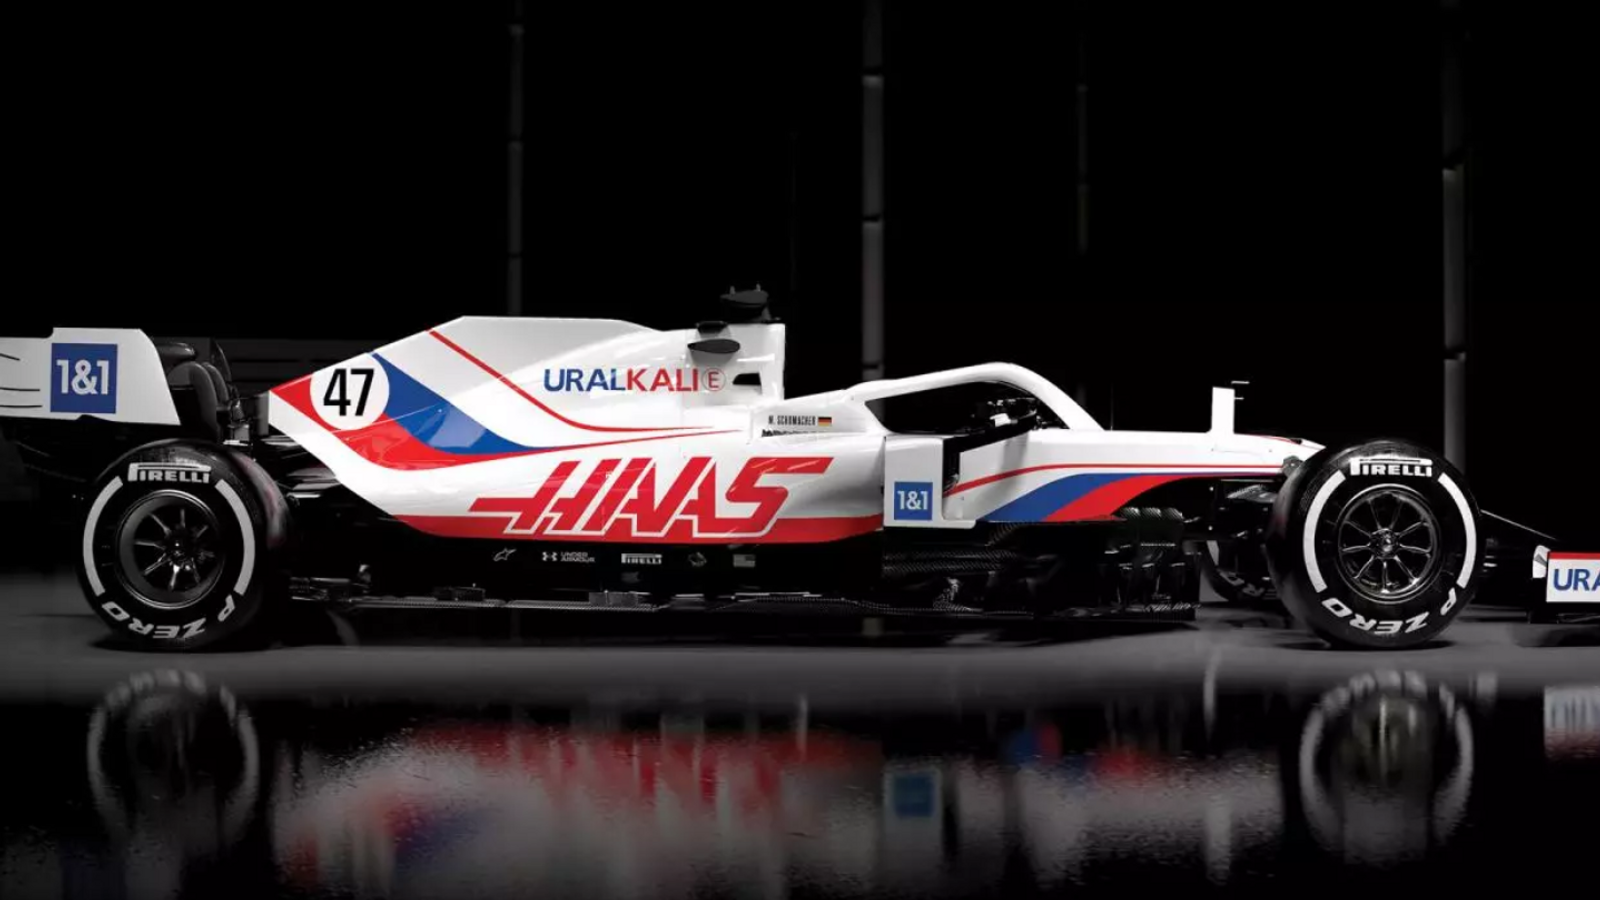 Haas Unveil New Look Livery For 2021 Formula 1 Season For All Rookie Mick Schumacher, Nikita Mazepin Line Up